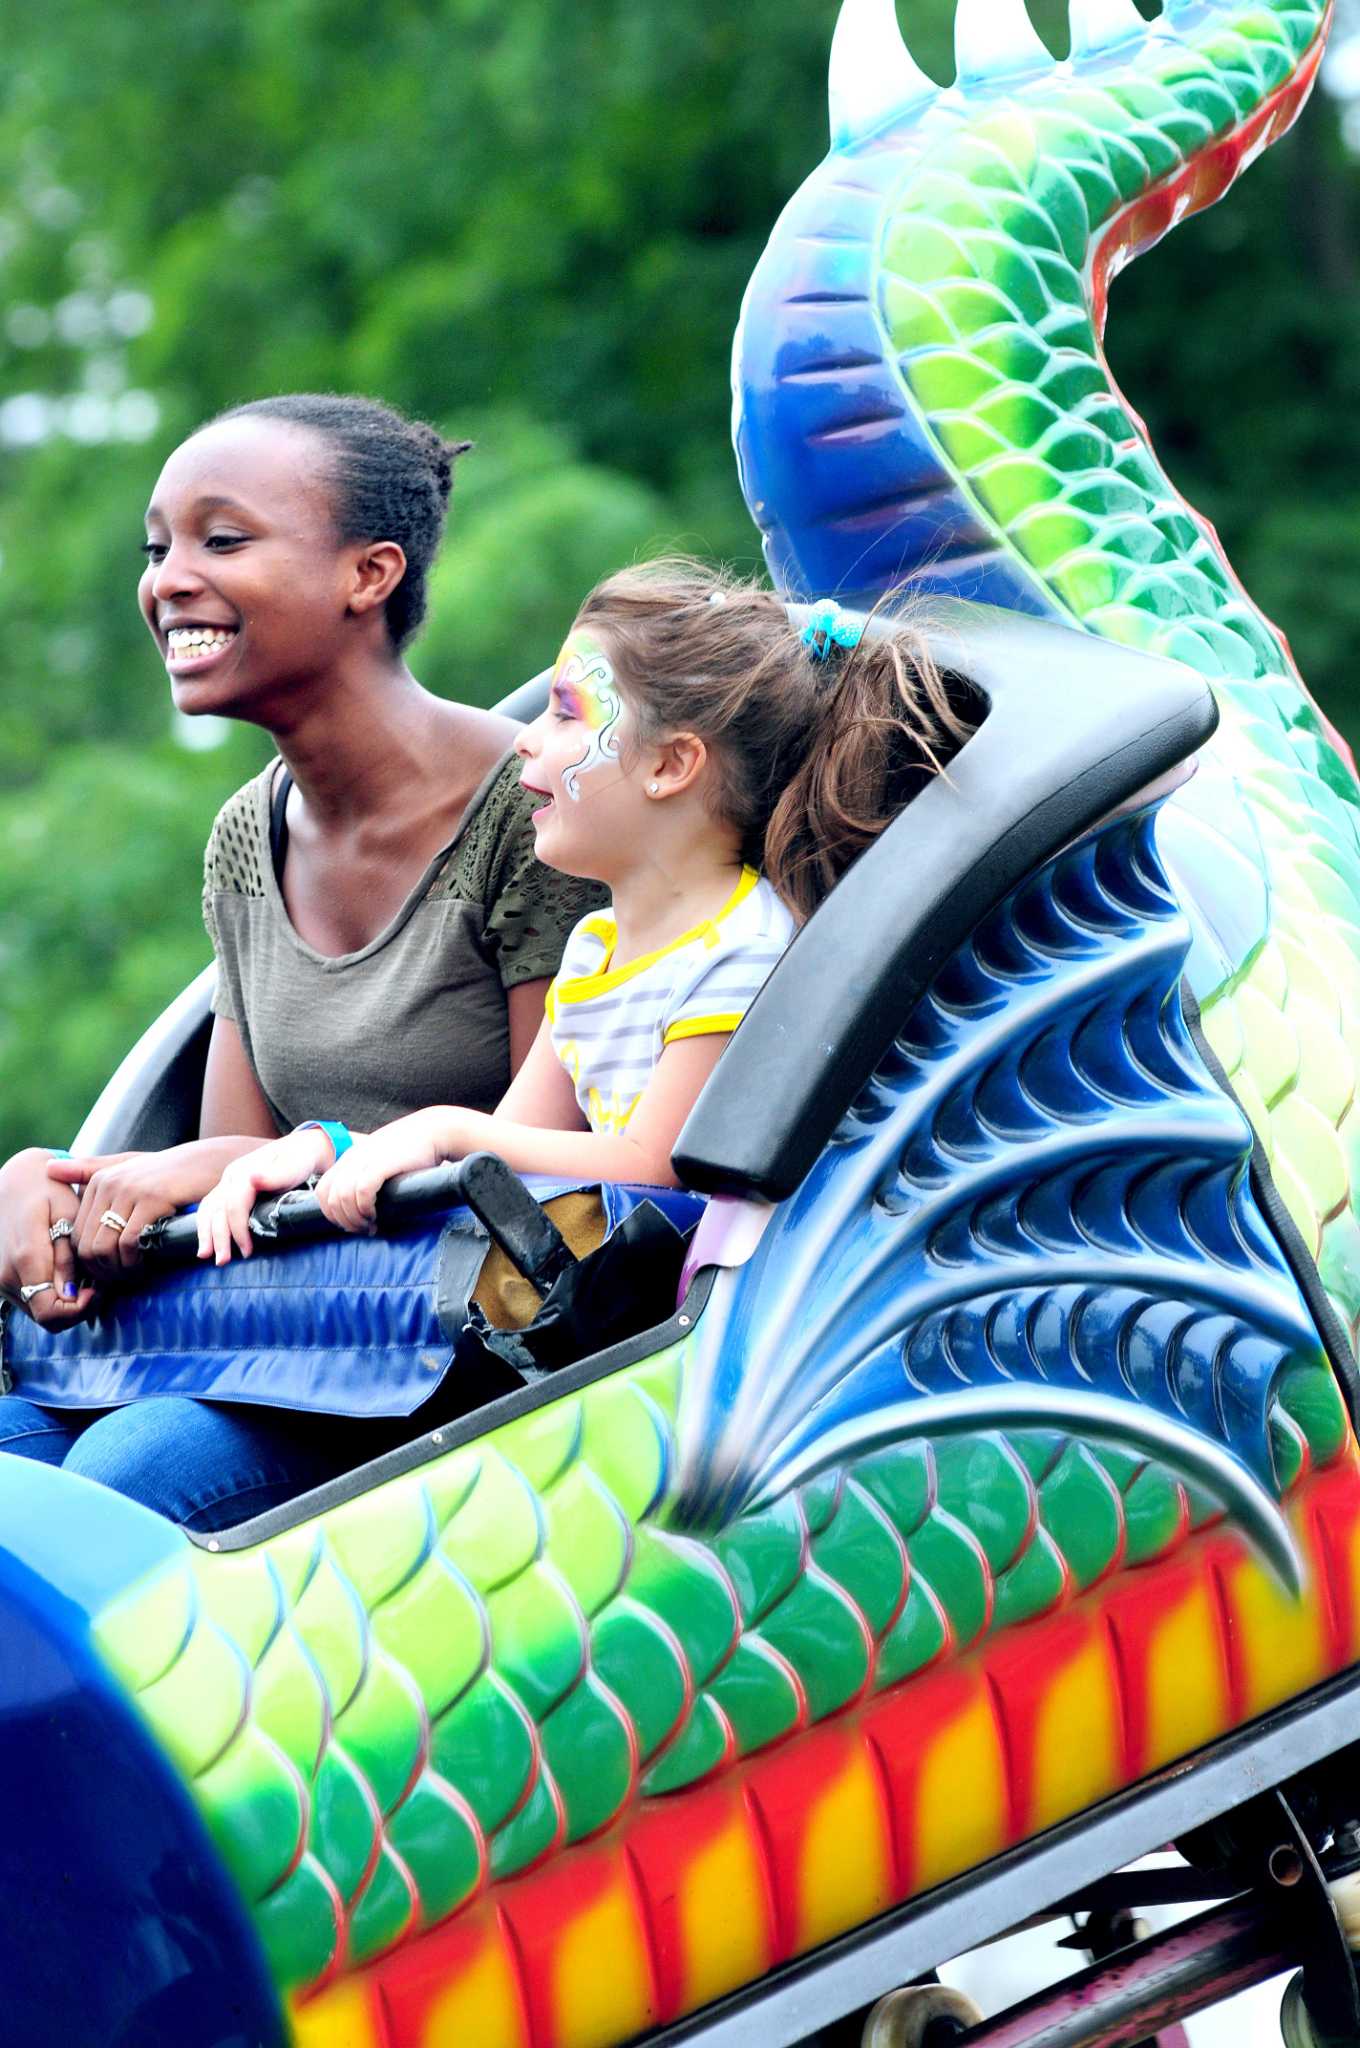 West Haven’s Savin Rock Festival is back, with rides, food, music